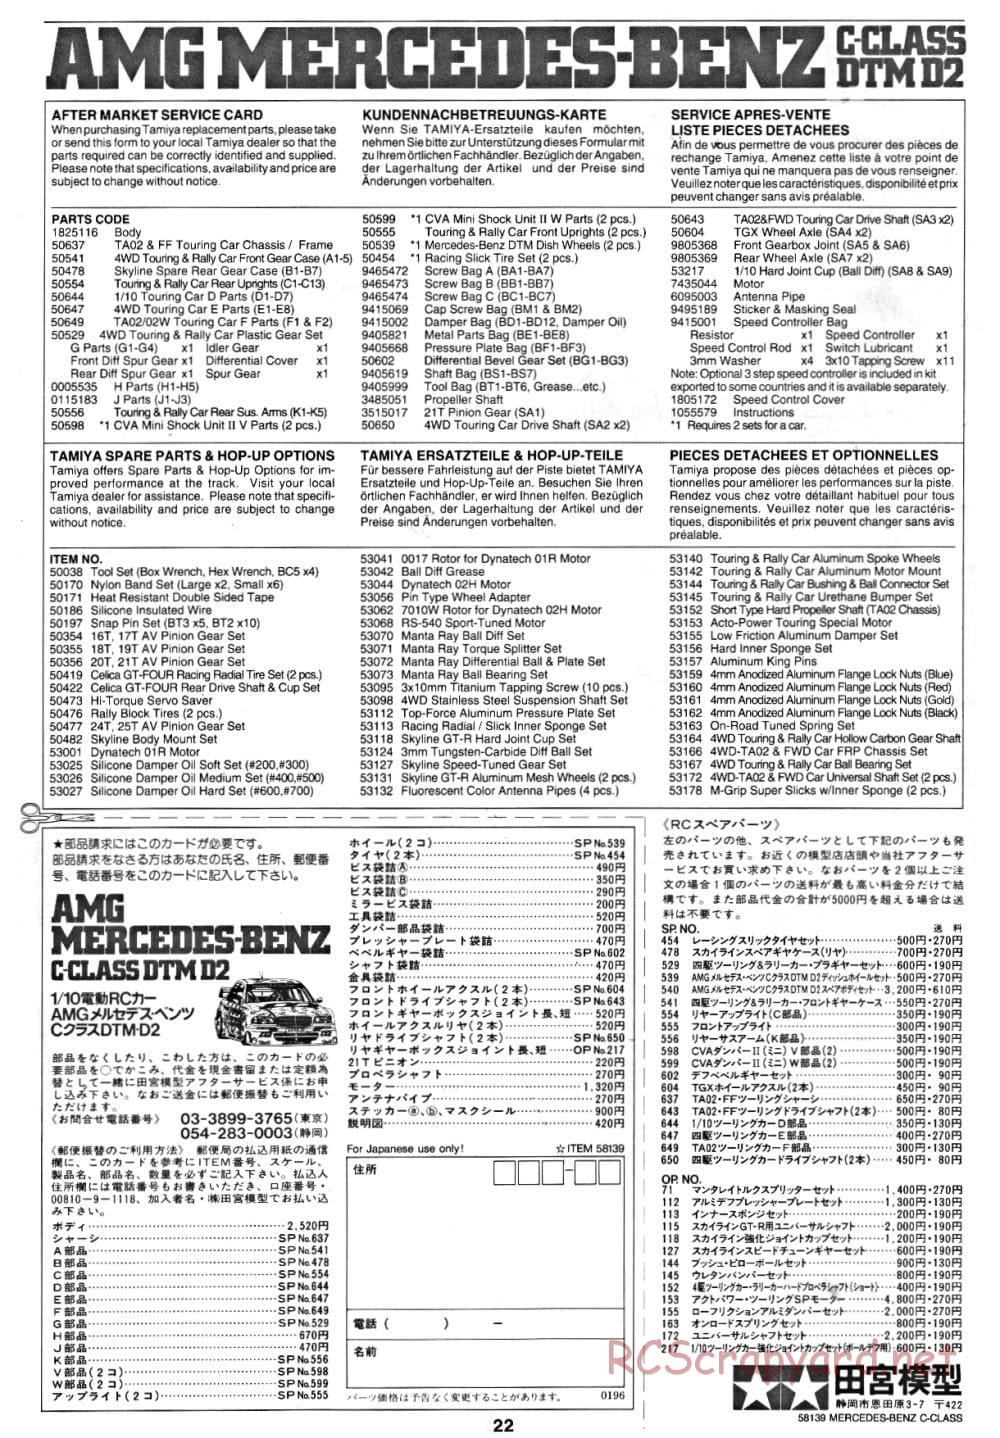 Tamiya - AMG Mercedes-Benz C-Class DTM D2 - TA-02 Chassis - Manual - Page 23